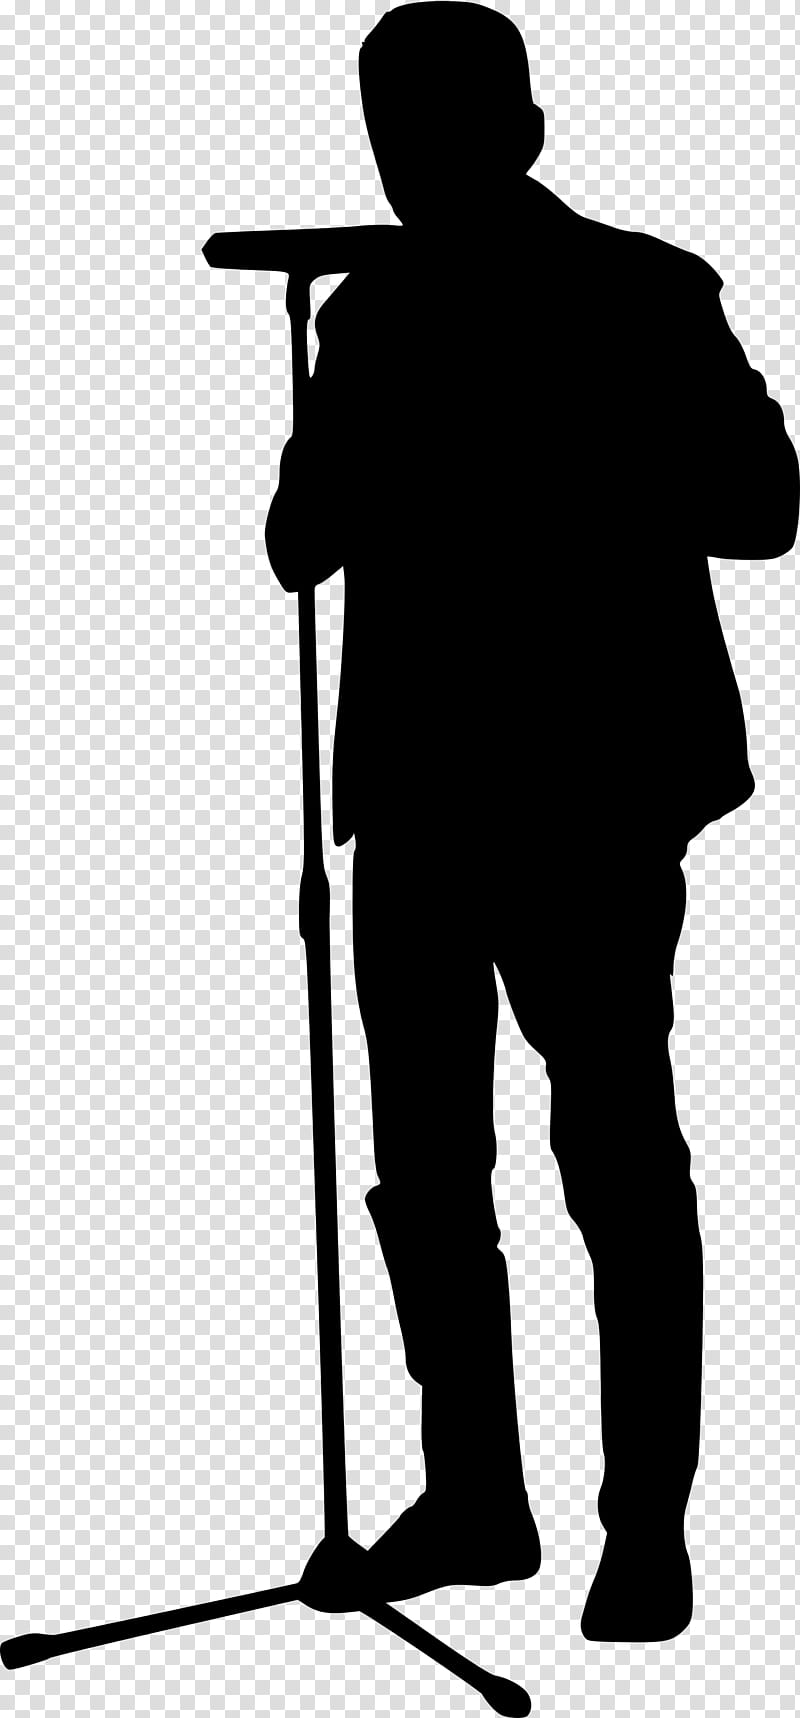 Cartoon Microphone, Silhouette, Person, Black White M, Human, Angle, Running, Behavior transparent background PNG clipart